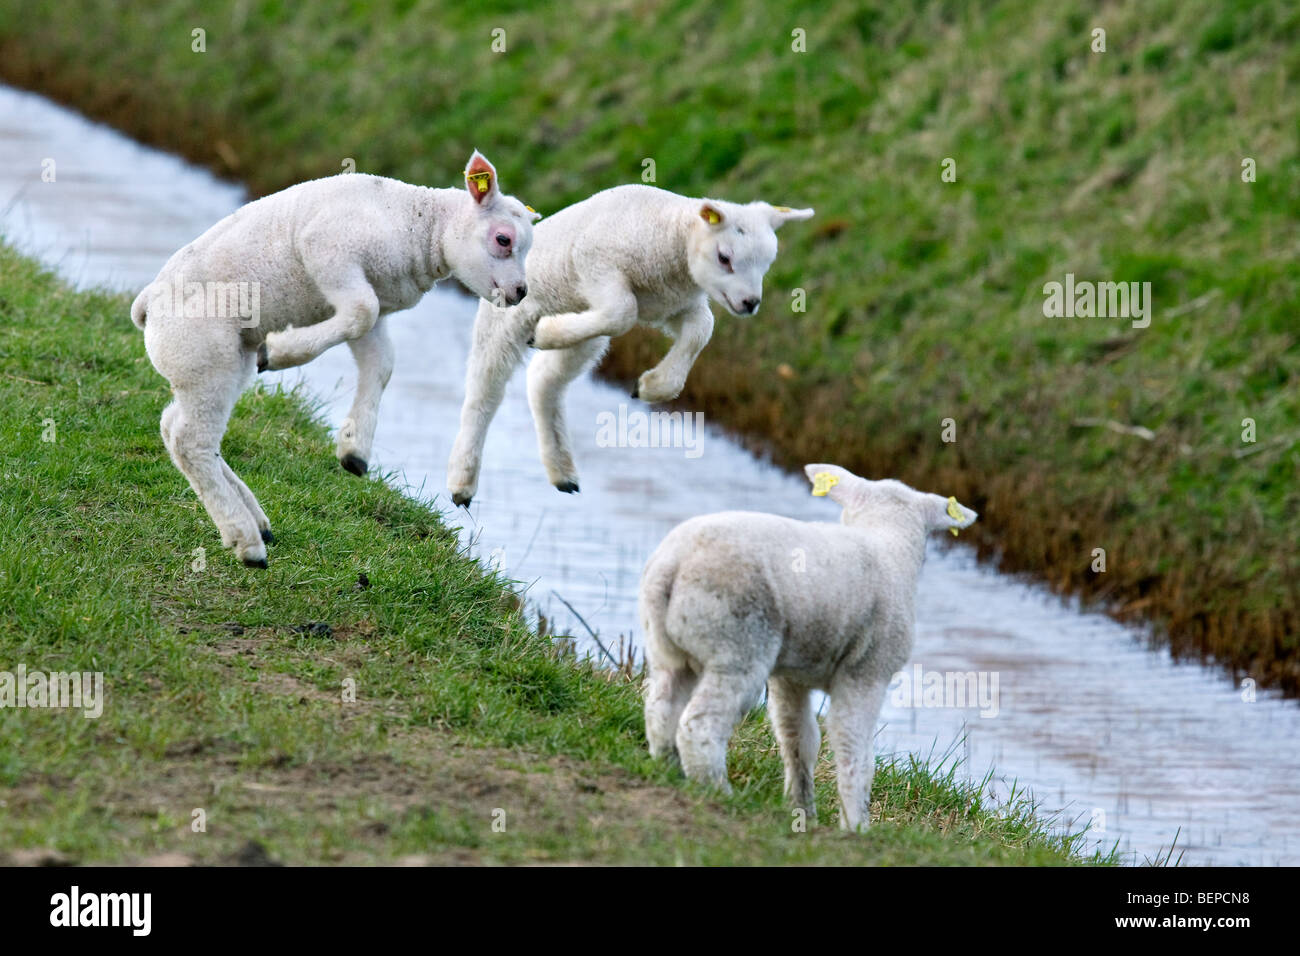 Three lambs (Ovis aries) playing / jumping in field with brook Stock Photo